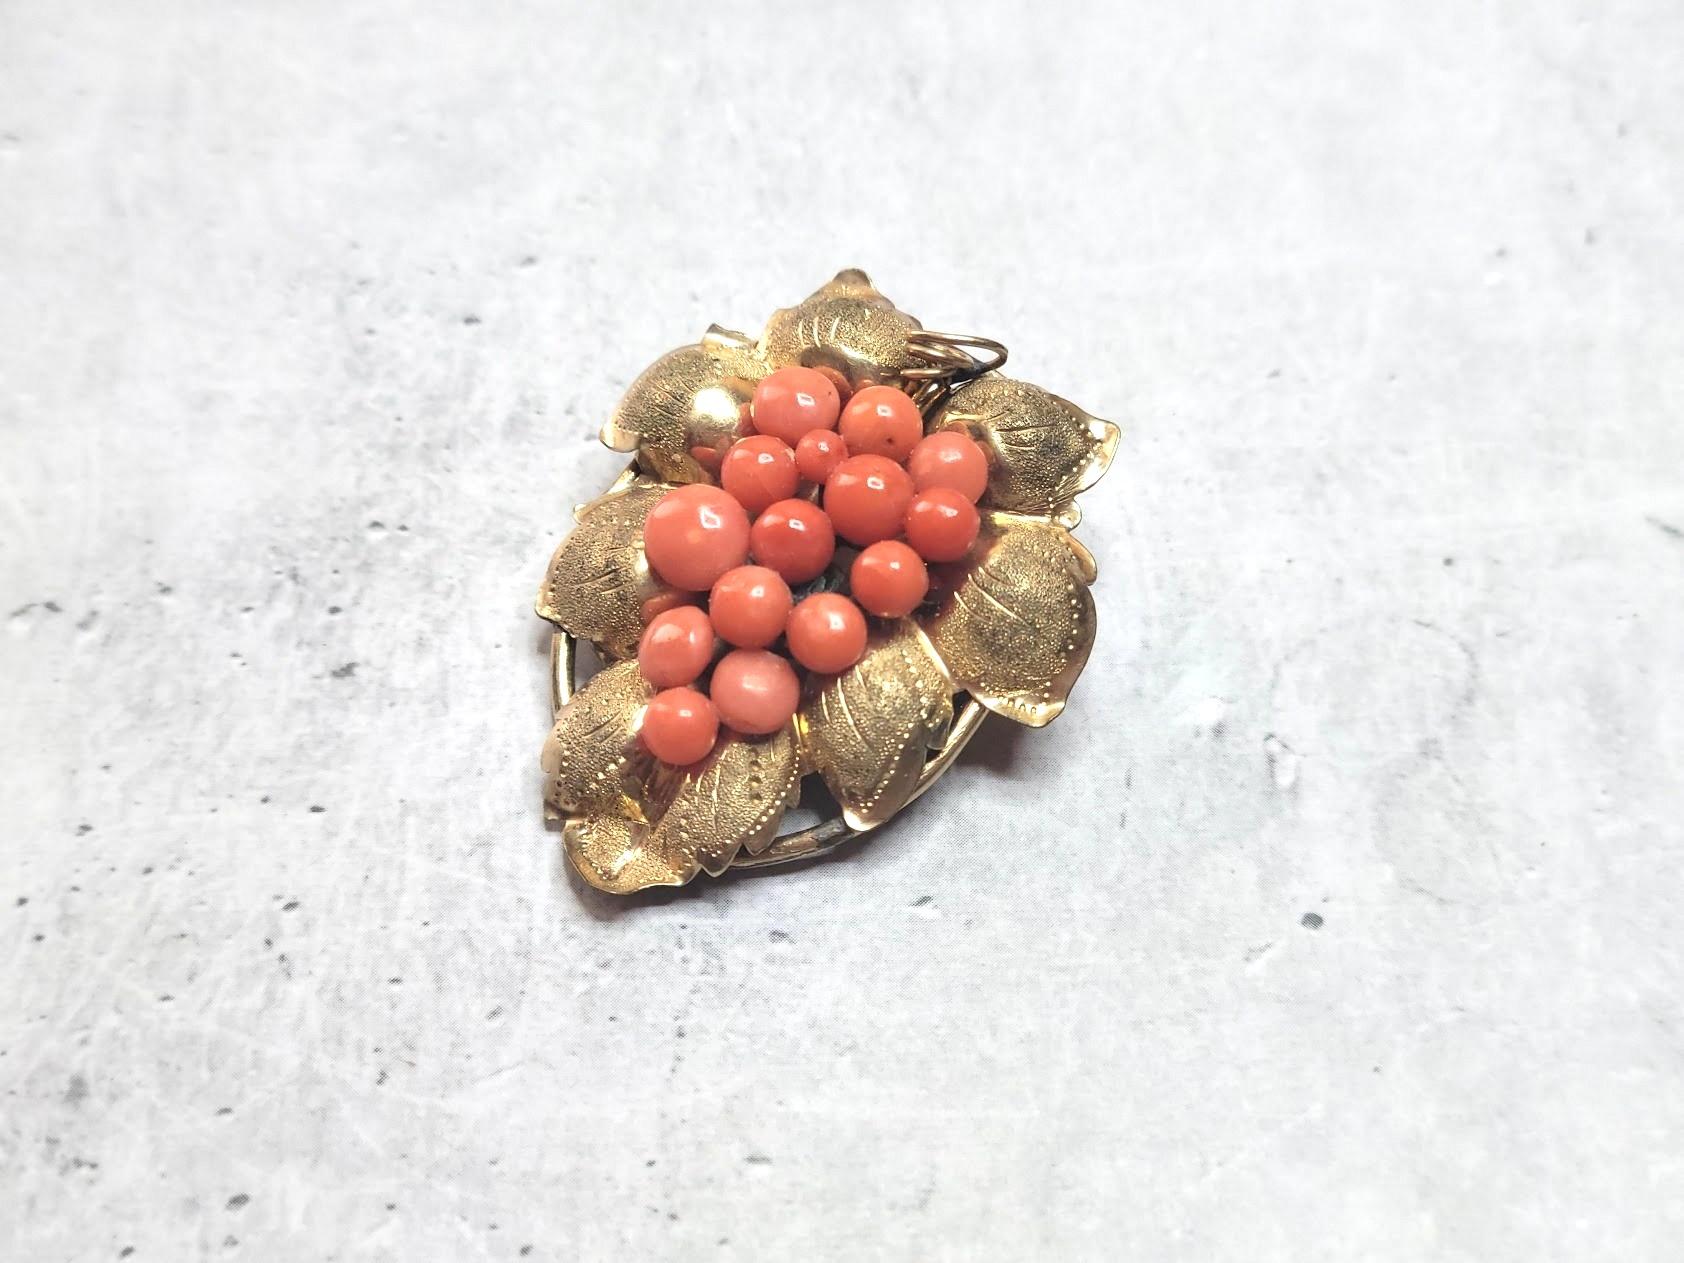 Discover this exquisite antique grape brooch from the Victorian Romantic era, featuring a natural Mediterranean coral. This brooch is a testament to the high skill of English jewelers during the Victorian period, and its timeless design is not